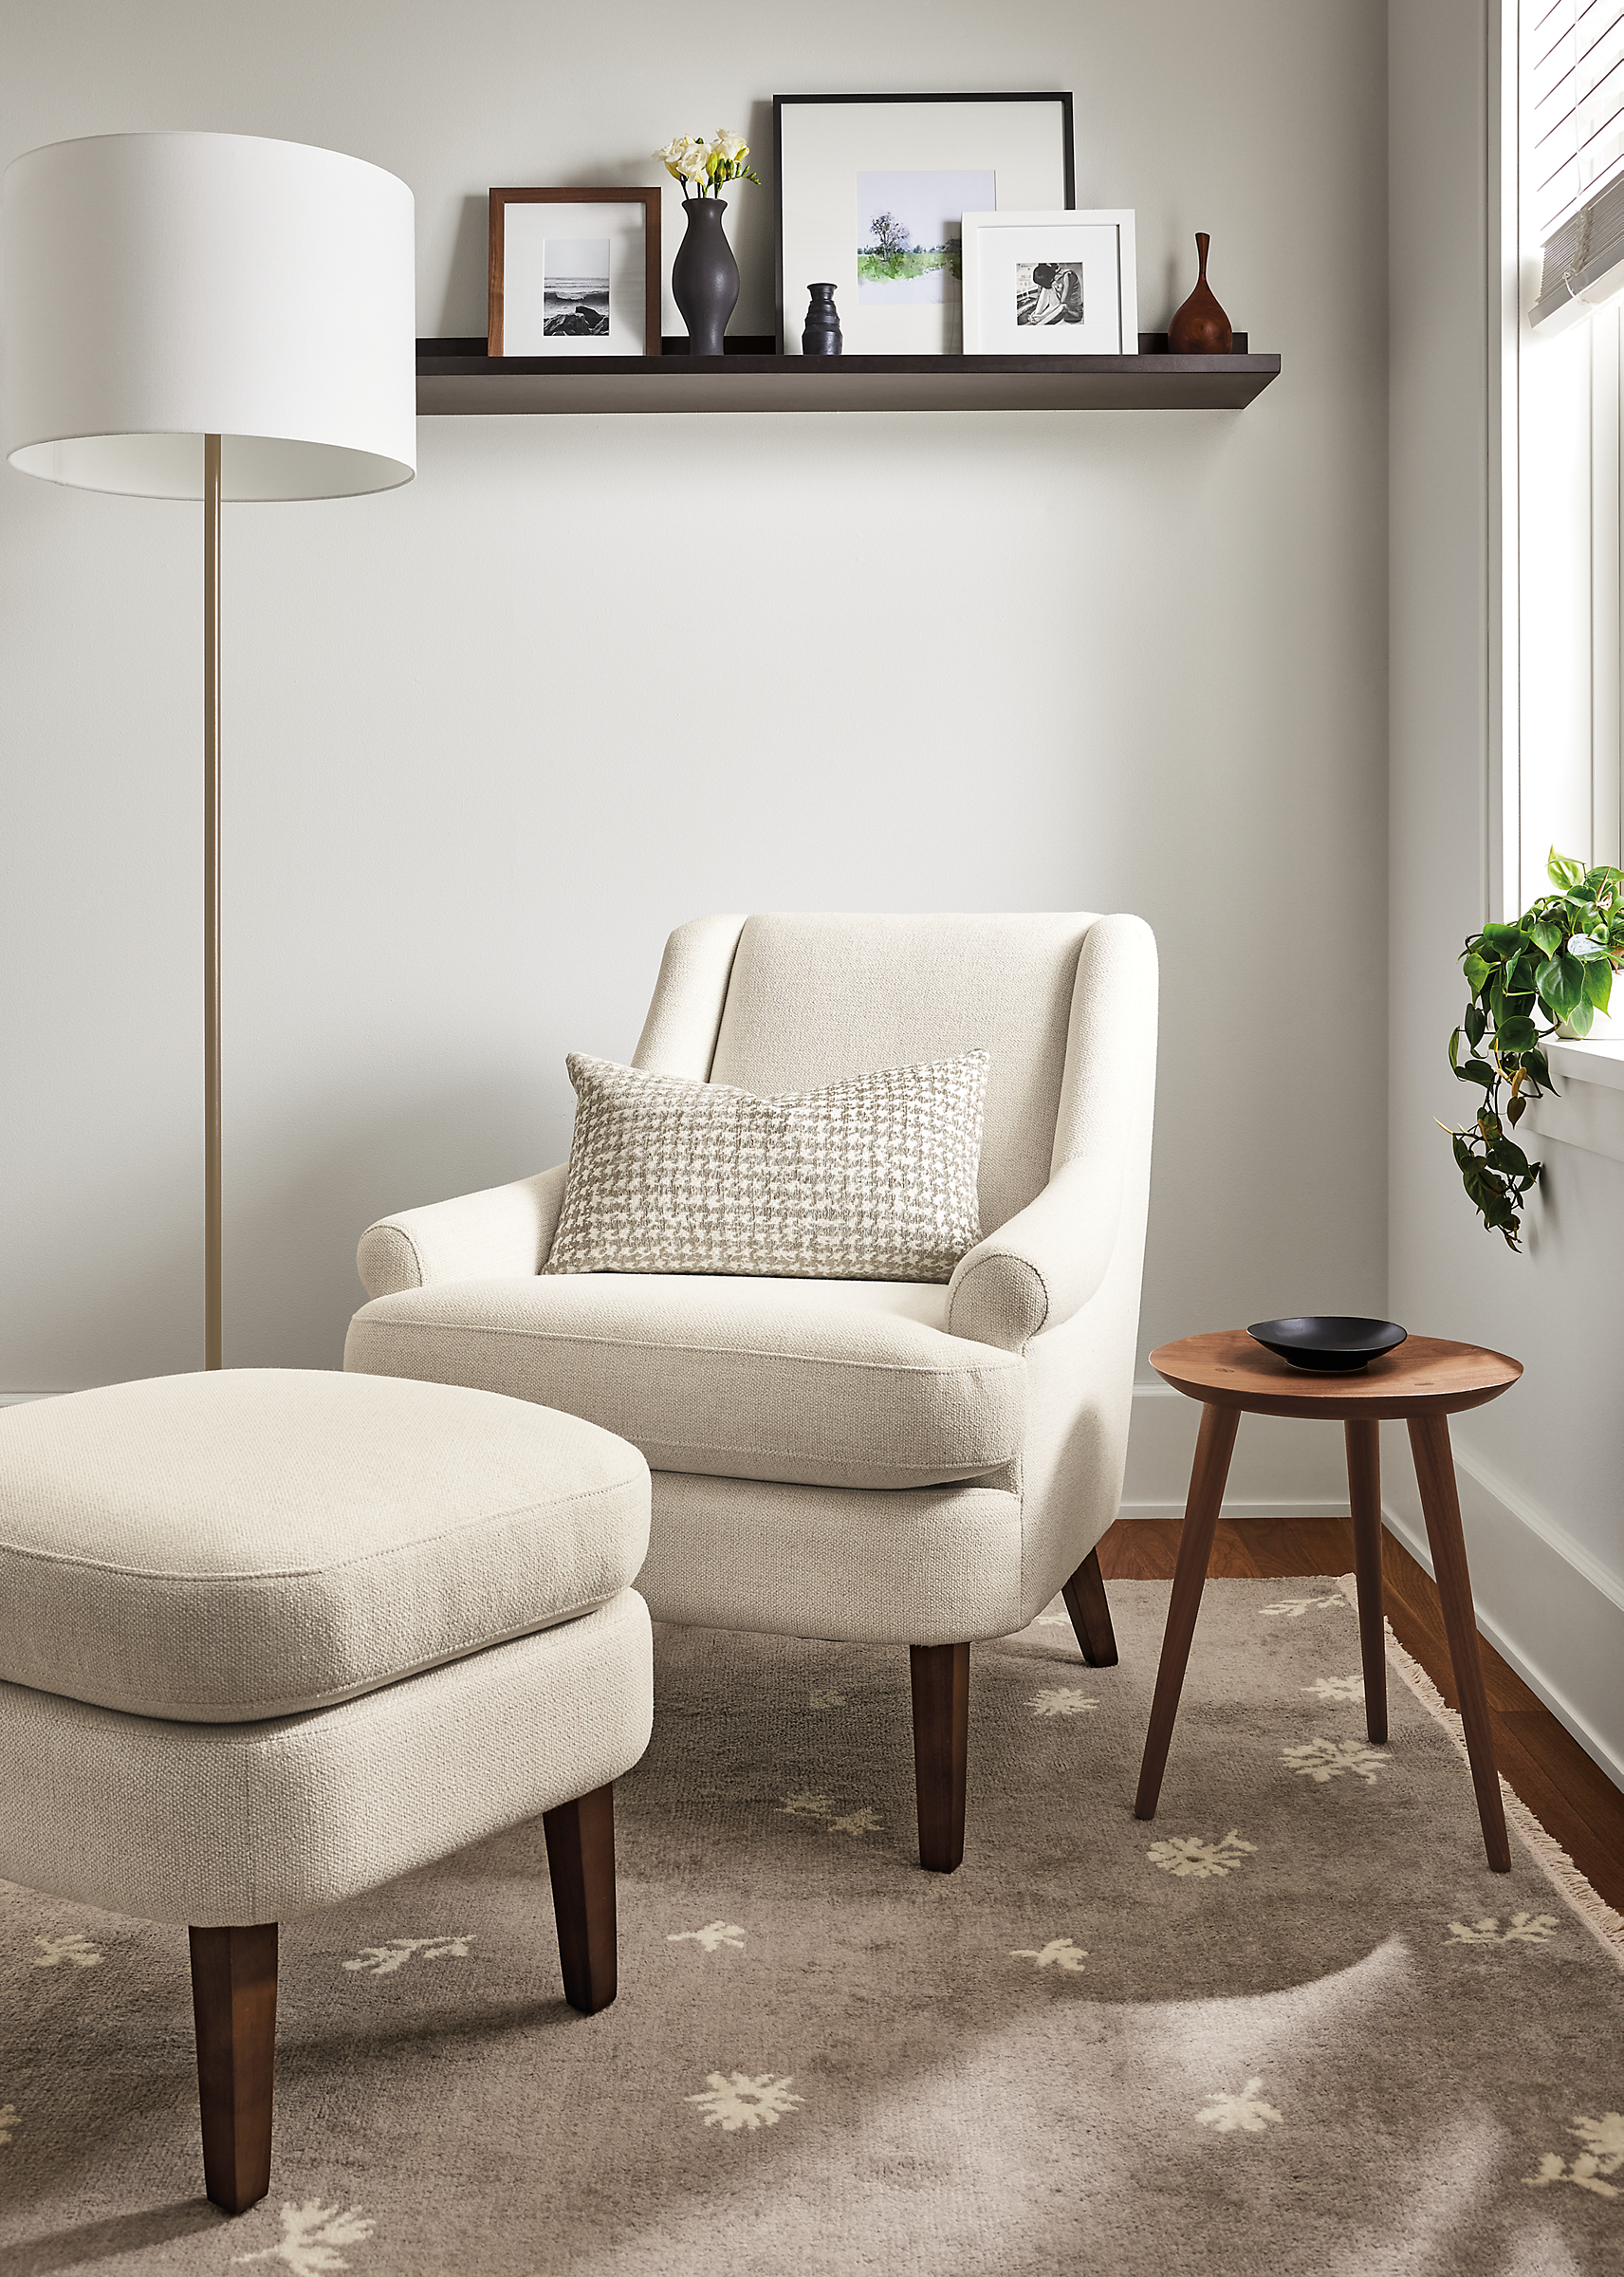 living room with Louise Chair and ottoman in Tepic Ivory, fremont floor lamp.